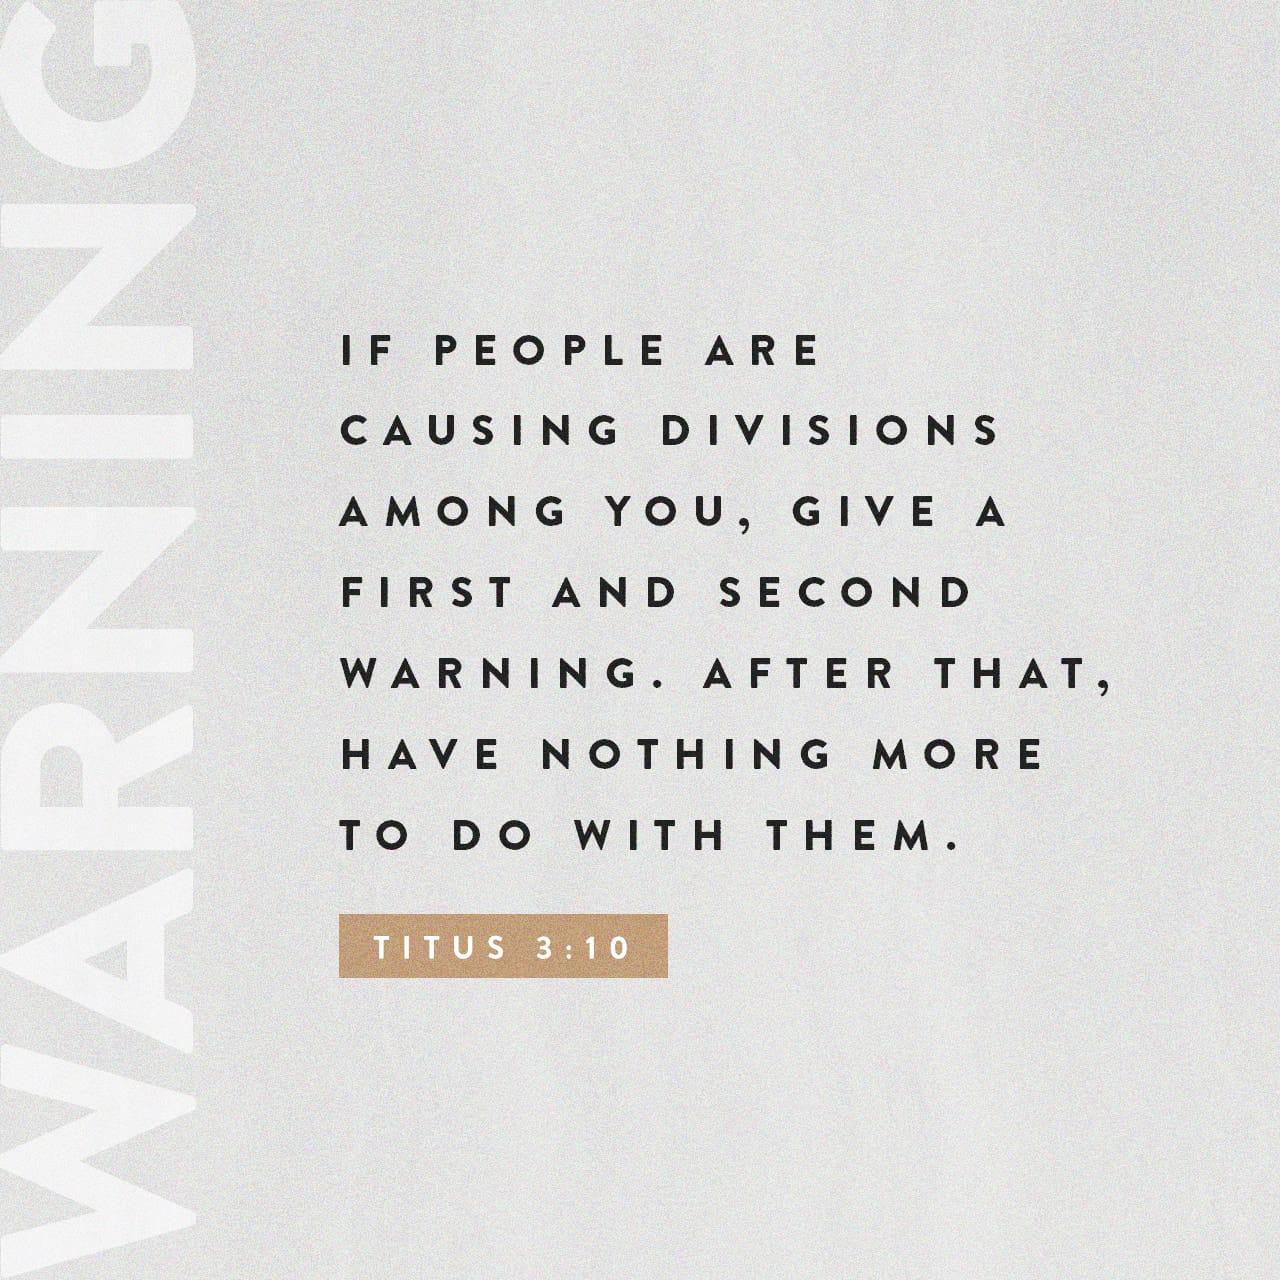 Bible Verse of the Day - day 87 - image 34738 (Titus 3:9-11)